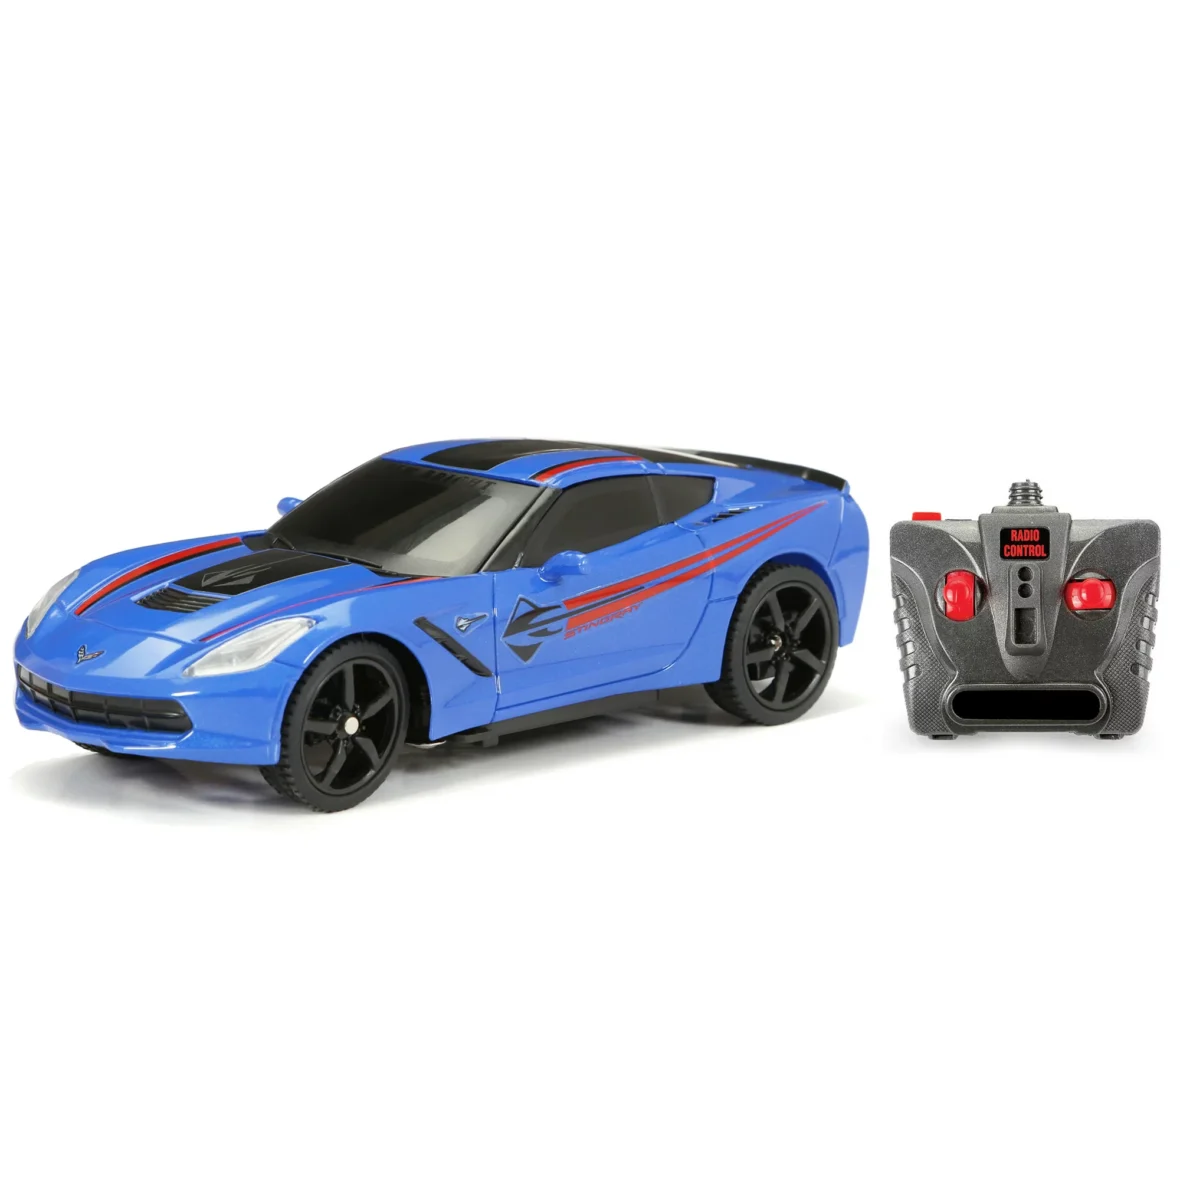 Adventure Force (1:24) Ford Mustang Mach 1 Battery Radio Control Sports Car, RED 2423-13R (Copy)